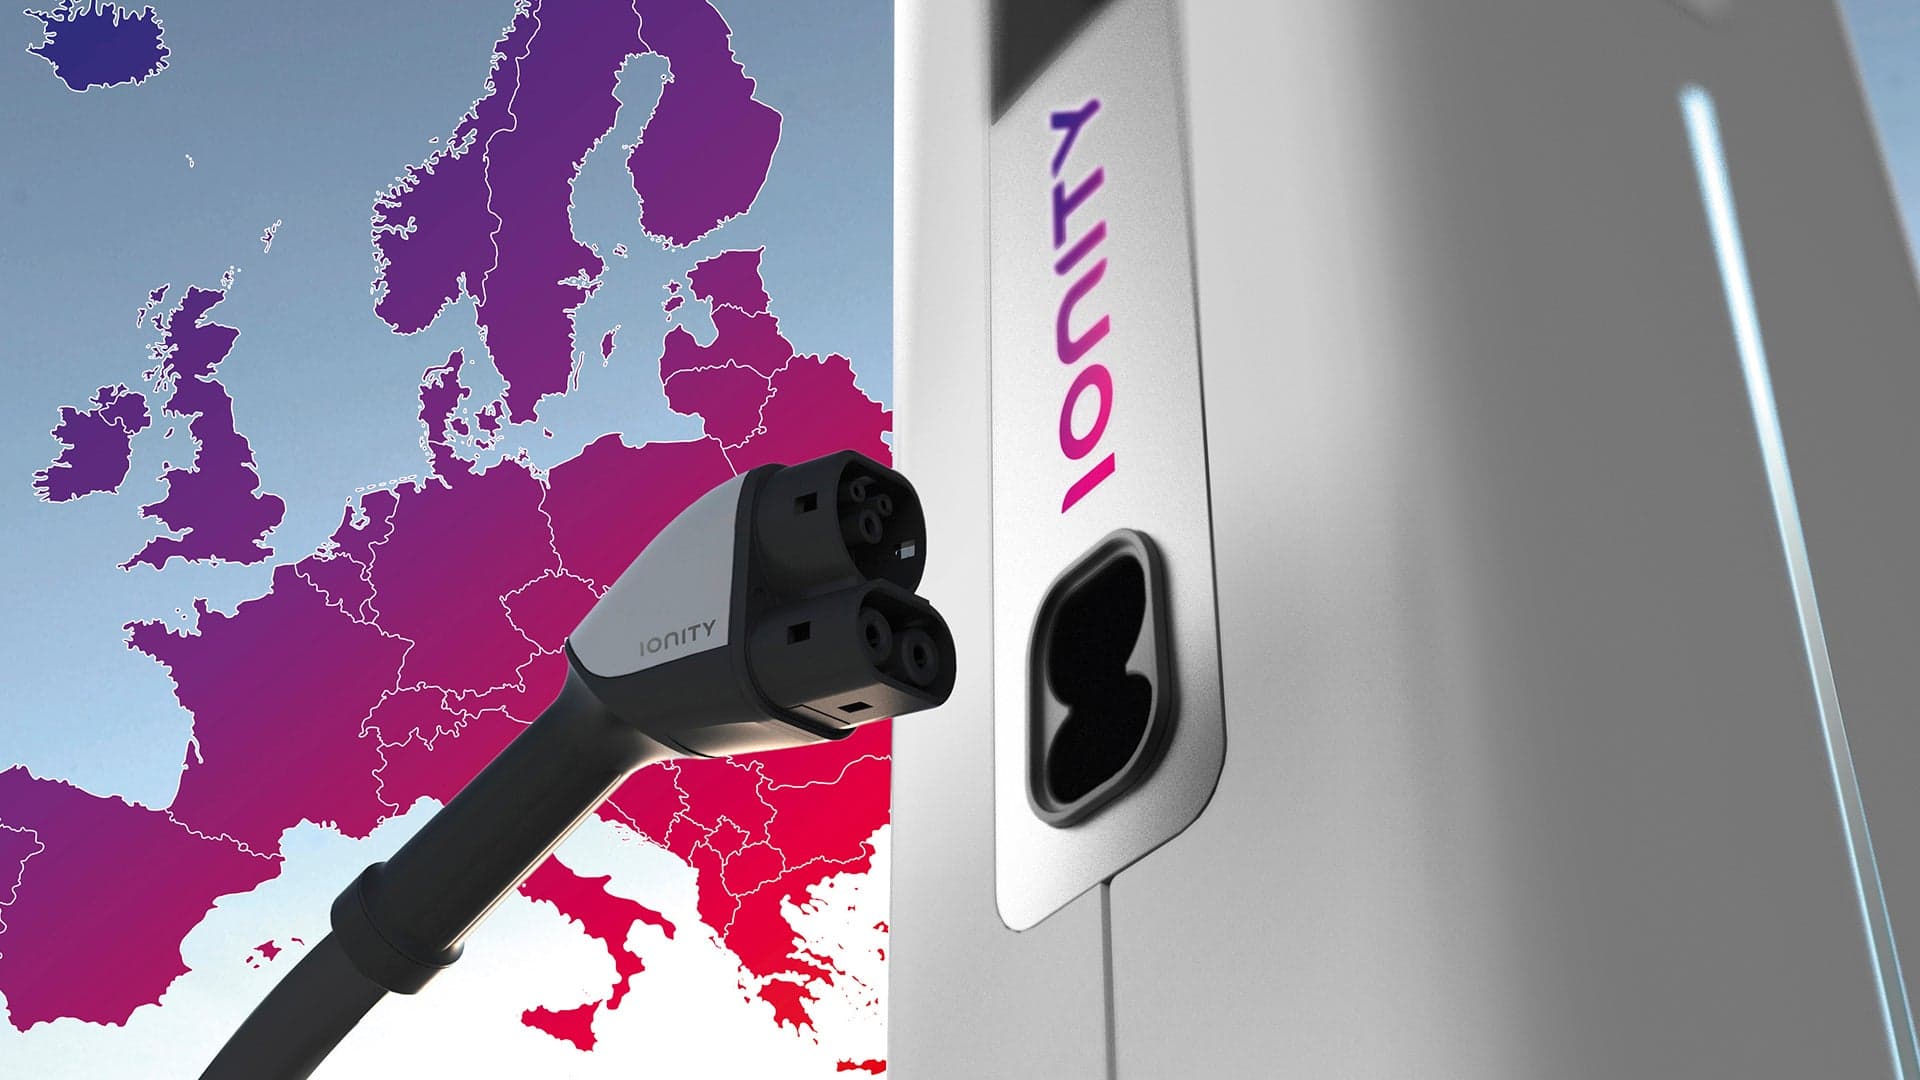 BMW, Daimler, Ford, and Volkswagen Team Up for Ultra-Fast Charging Network